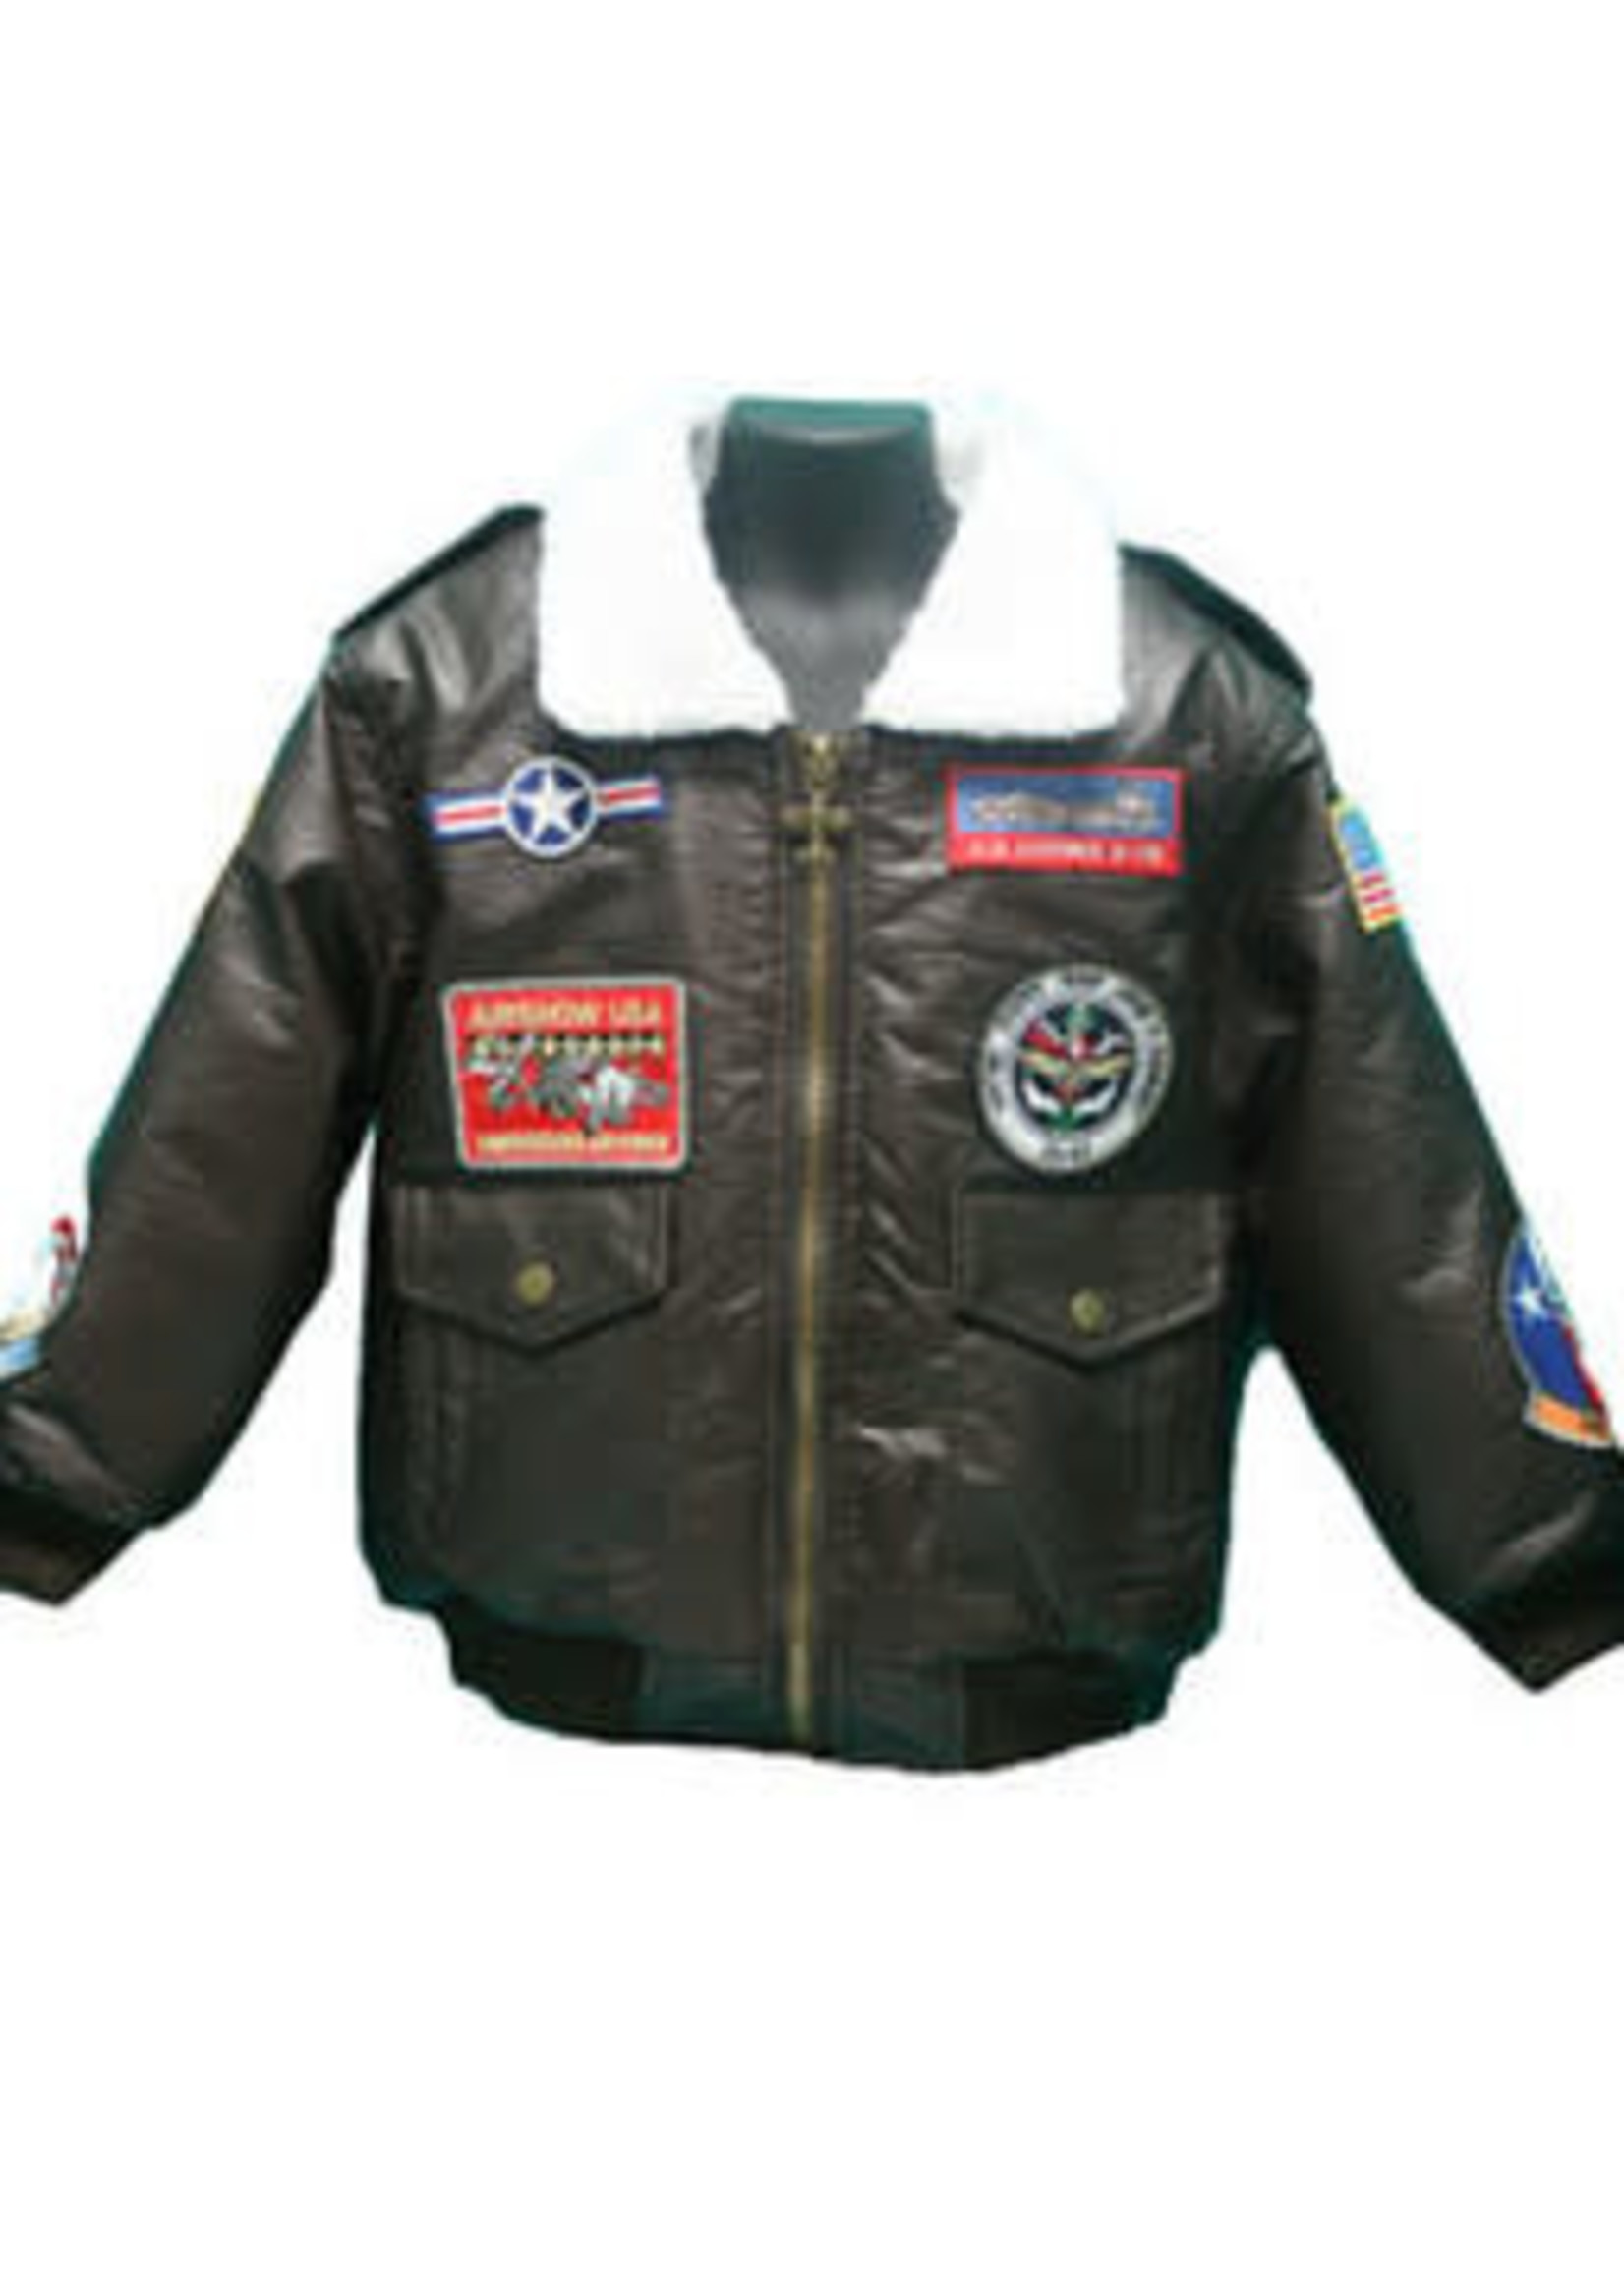 Up and Away Youth A-2 Bomber Jacket 3T